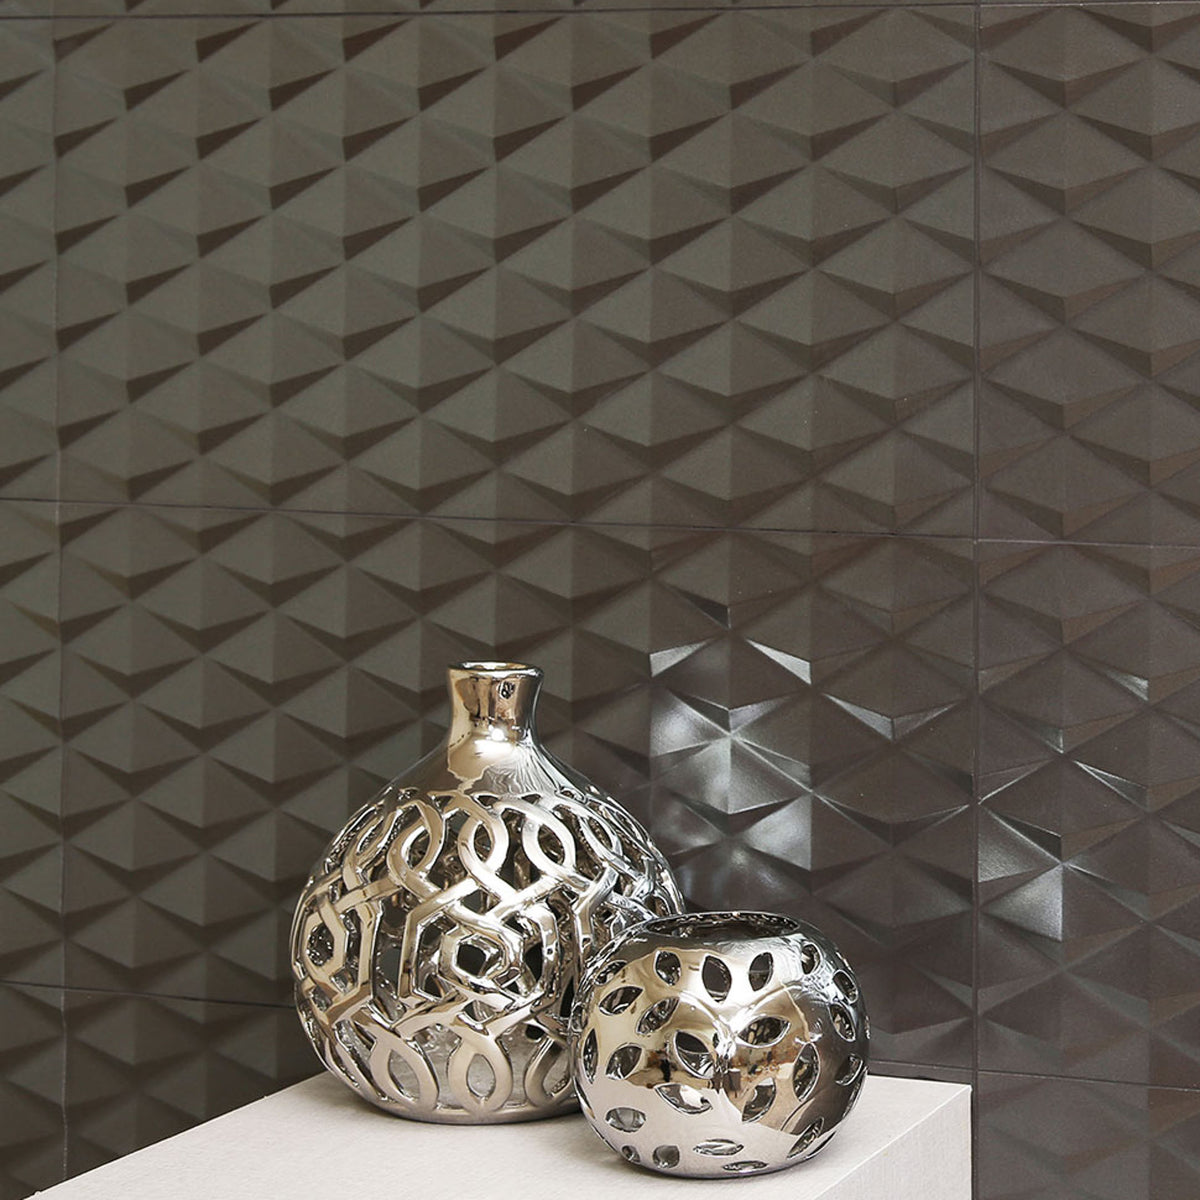 Sparkling 12" x 24" Contemporary 3D Wall Panel Tile